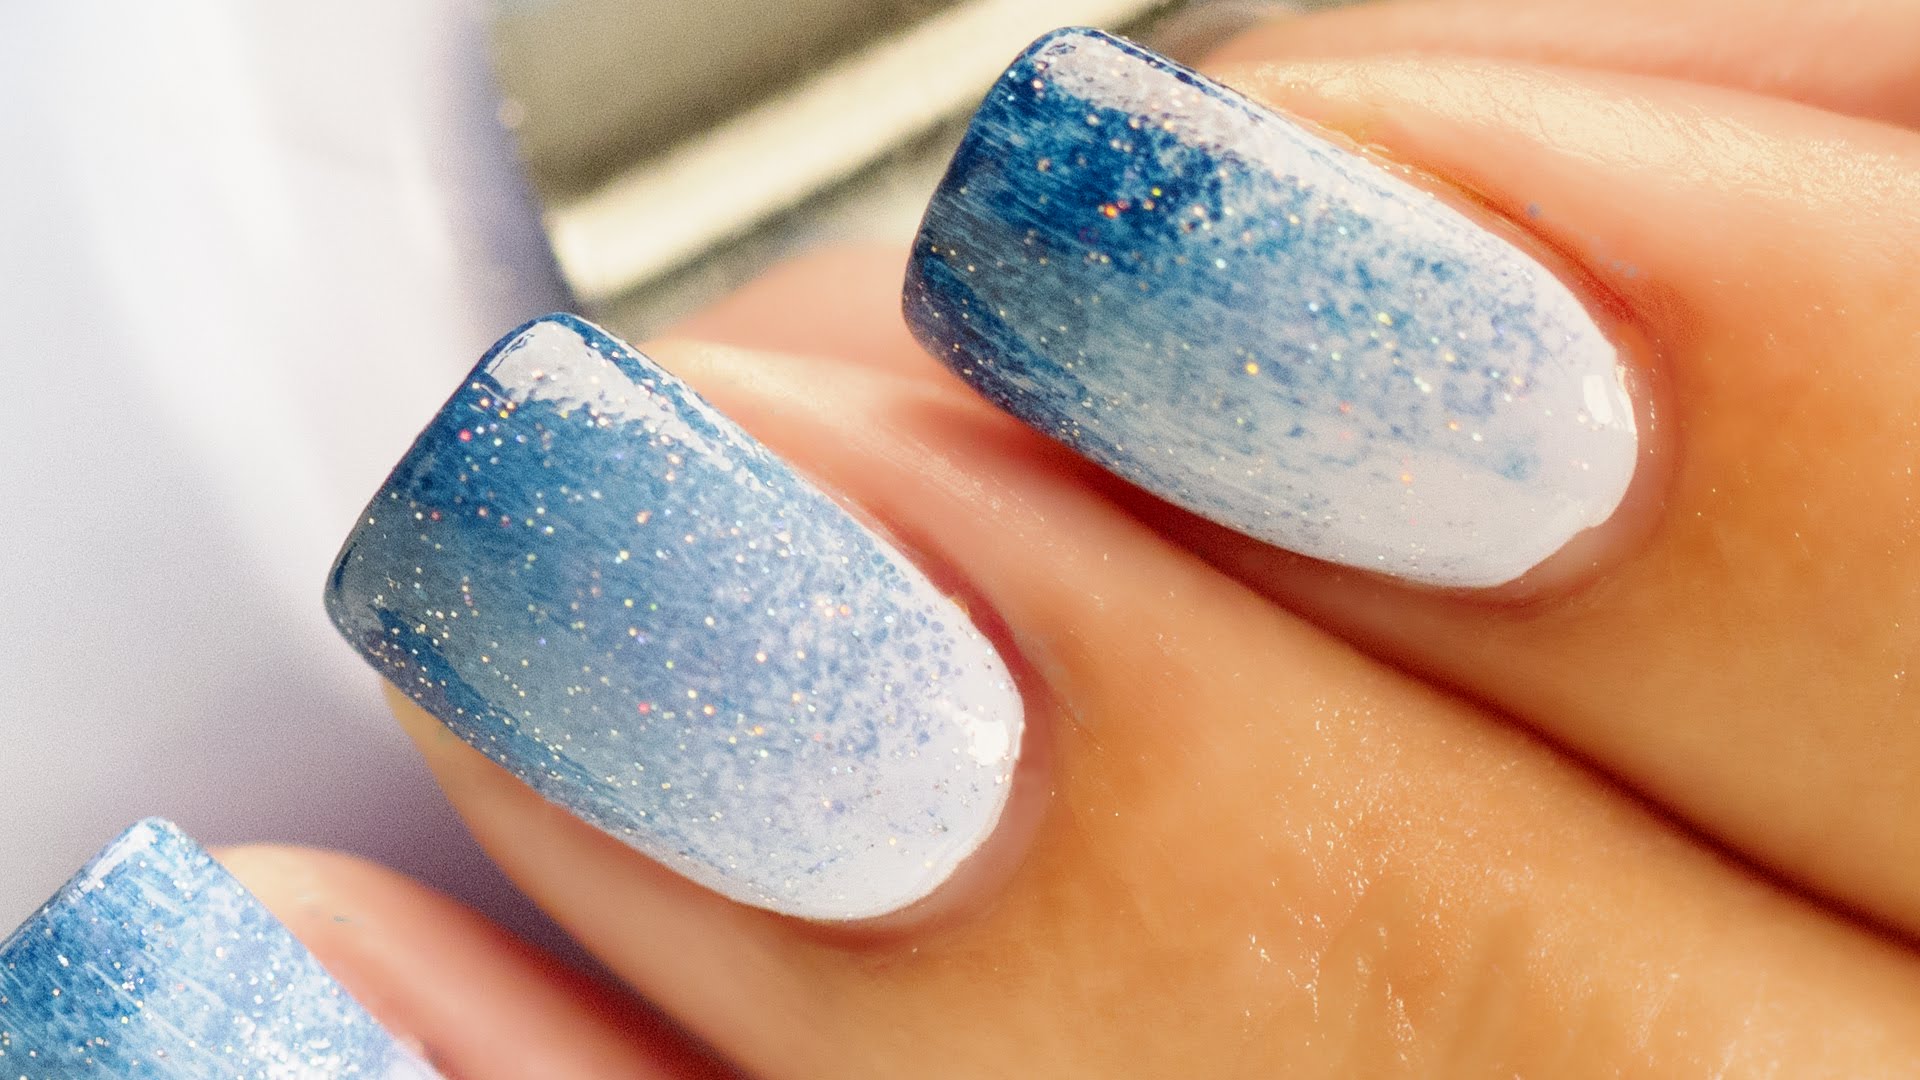 10. Elegant Short Nail Design Tutorial with Ombre Effect - wide 3